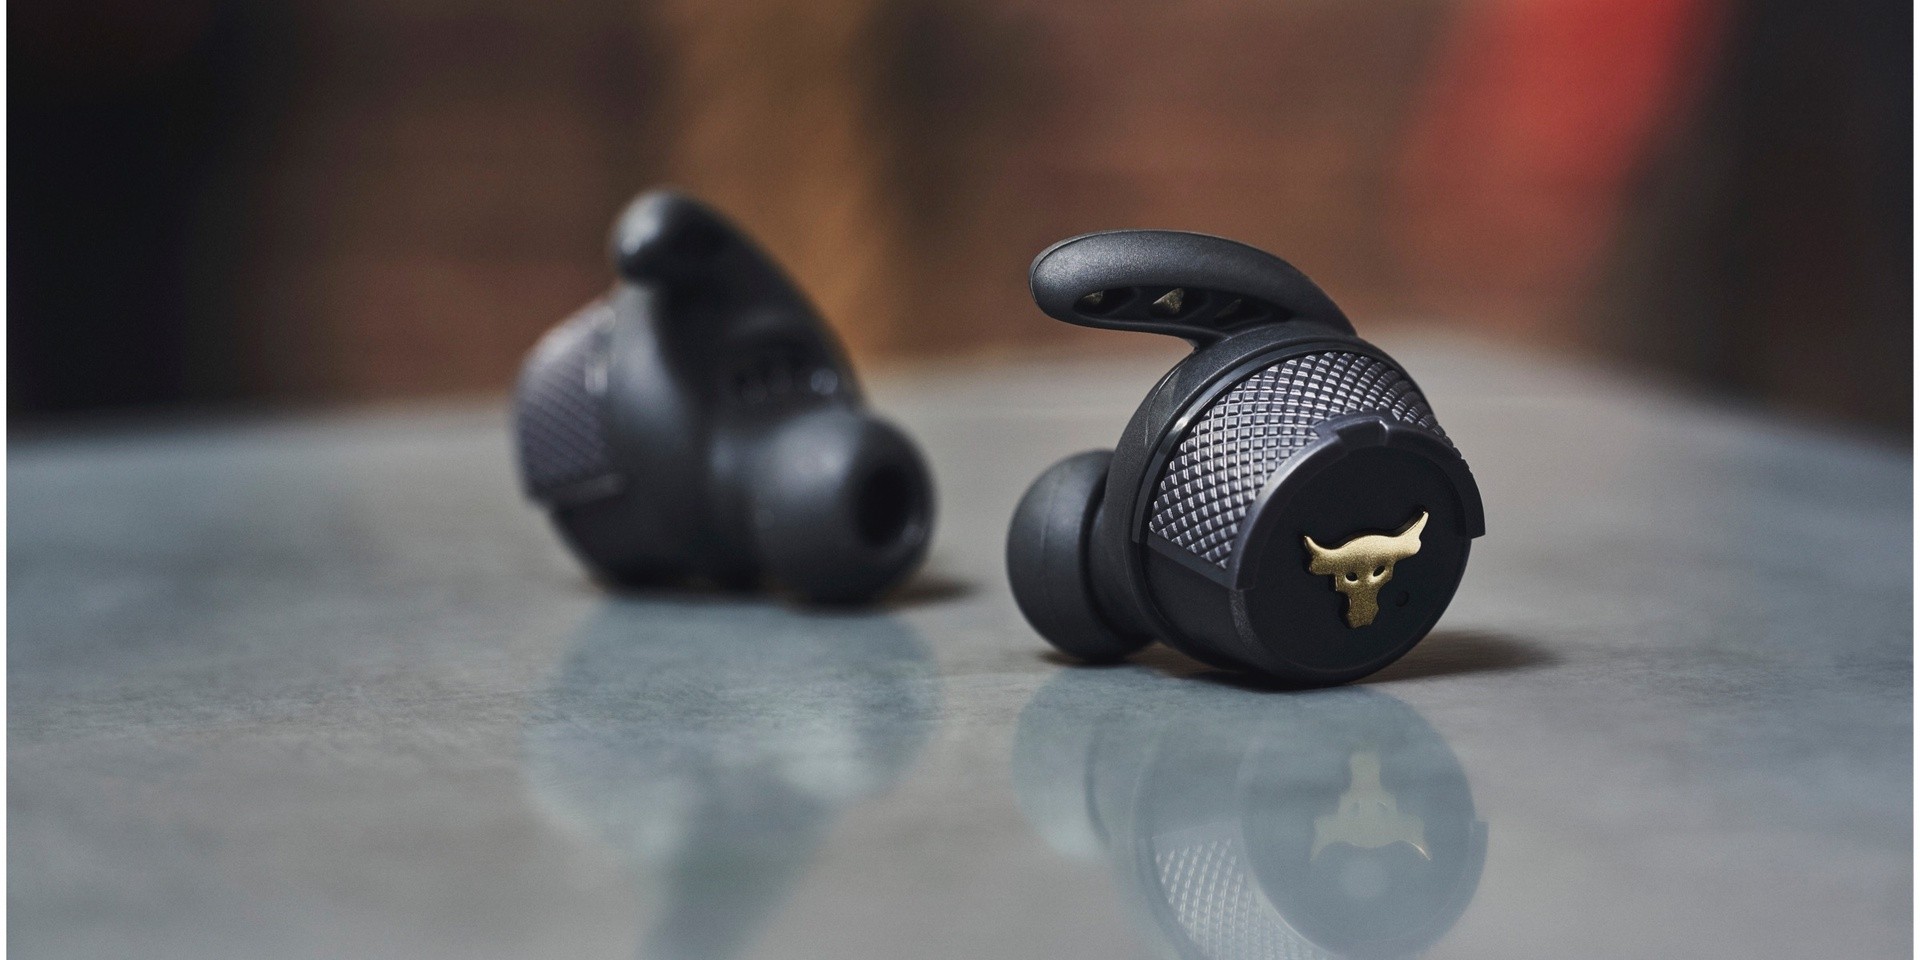 Dwayne 'The Rock' Johnson unveils new wireless earphone collaboration with Under Armour